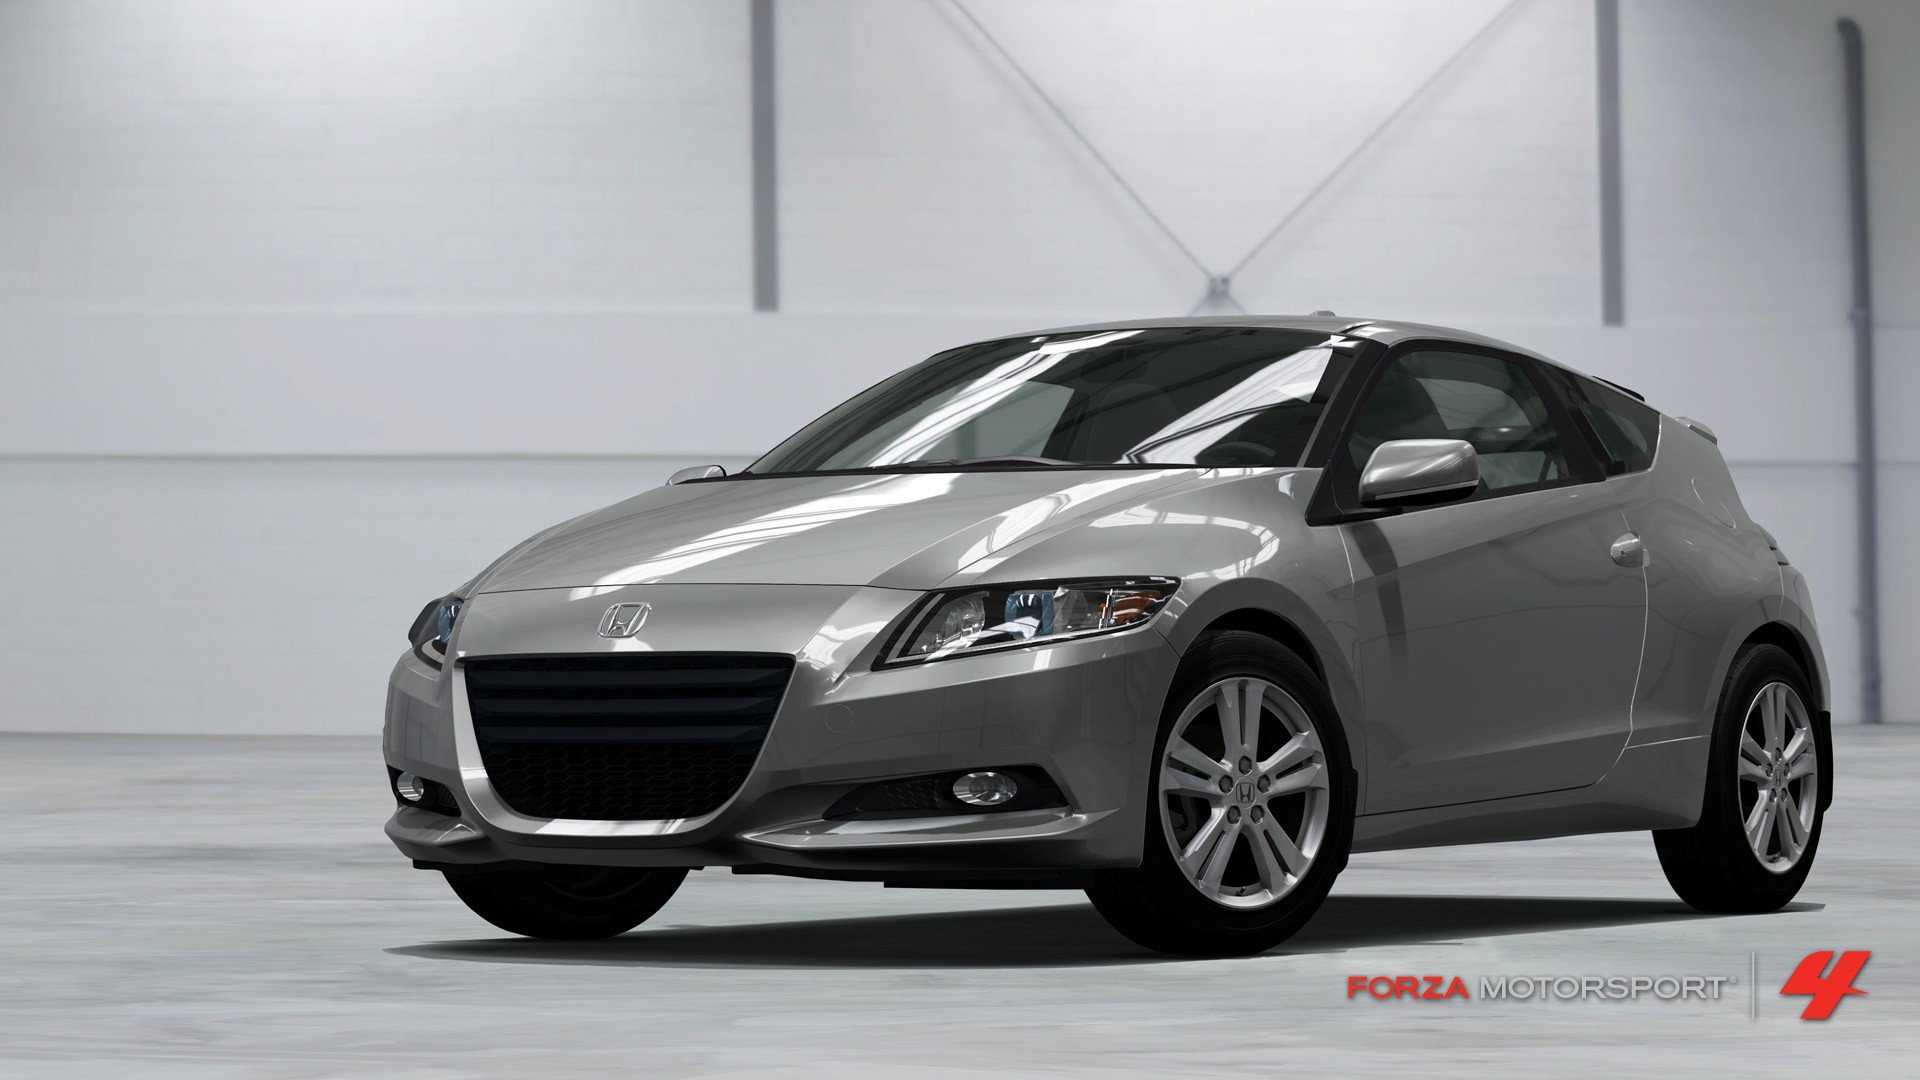 Video Games Cars Xbox 360 Honda Cr Z Forza Motorsport Wallpapers Hd Desktop And Mobile Backgrounds